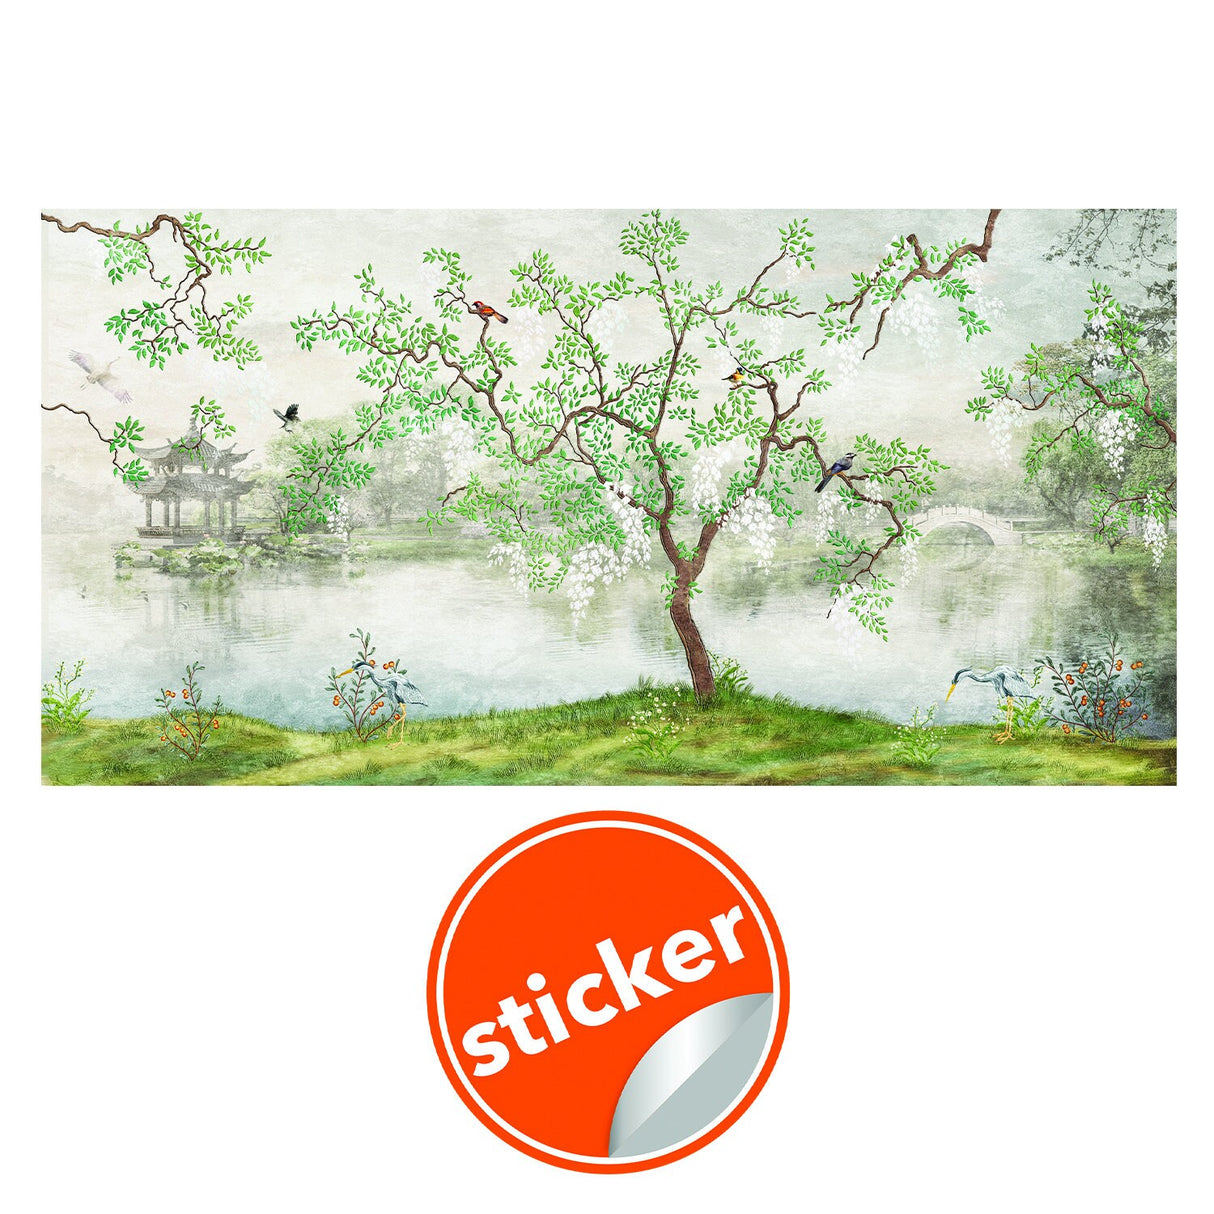 Toile Bedroom Chinoiserie Wallpaper Garden Vintage Sticker - Grey Adhesive Wall Paper Print Home Decor